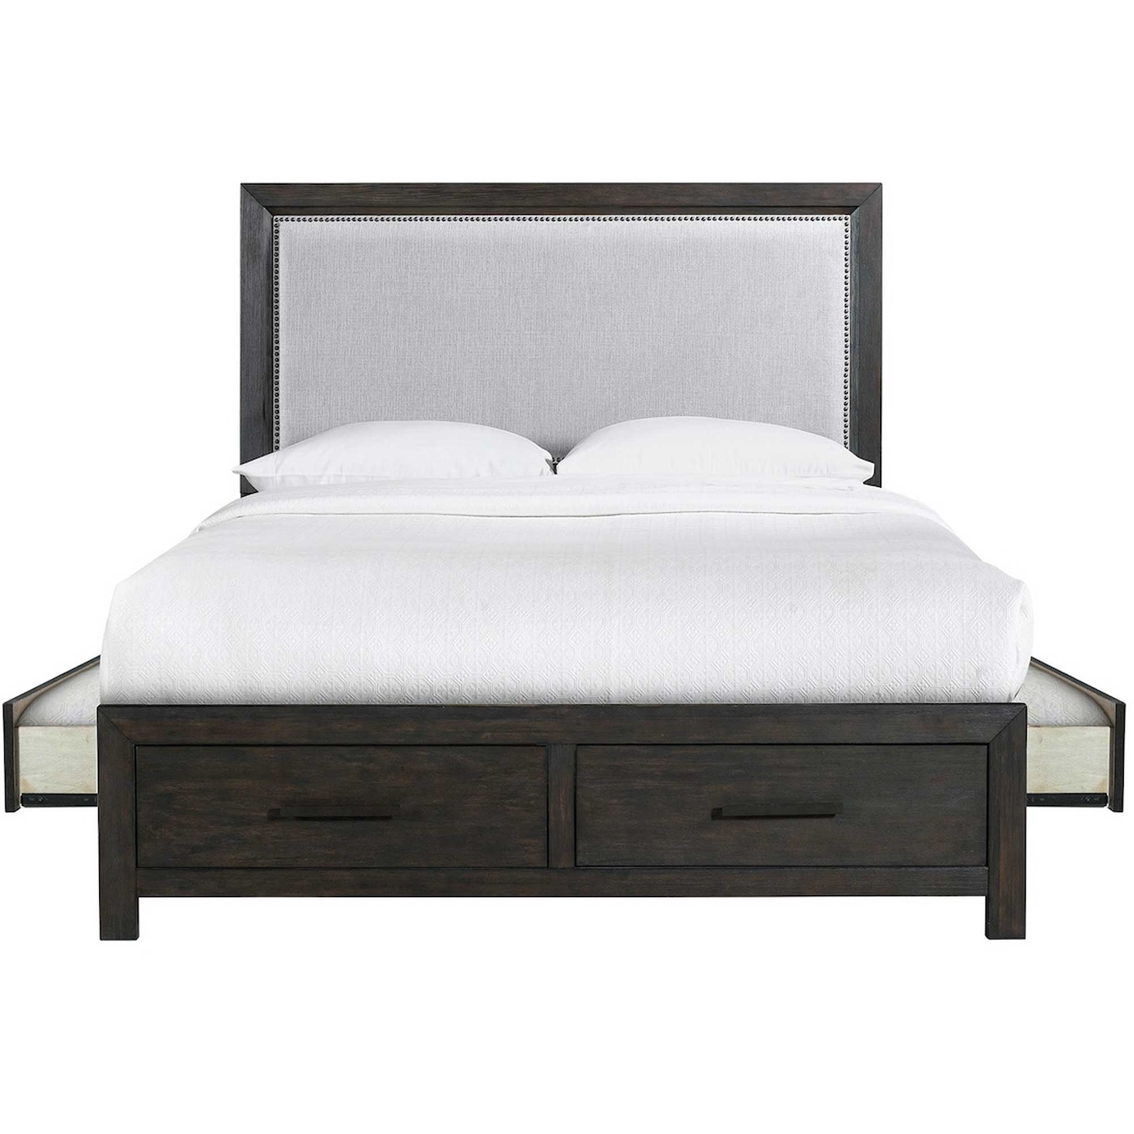 Elements Shelby Bedroom Collection Storage Bed | Beds | Furniture ...